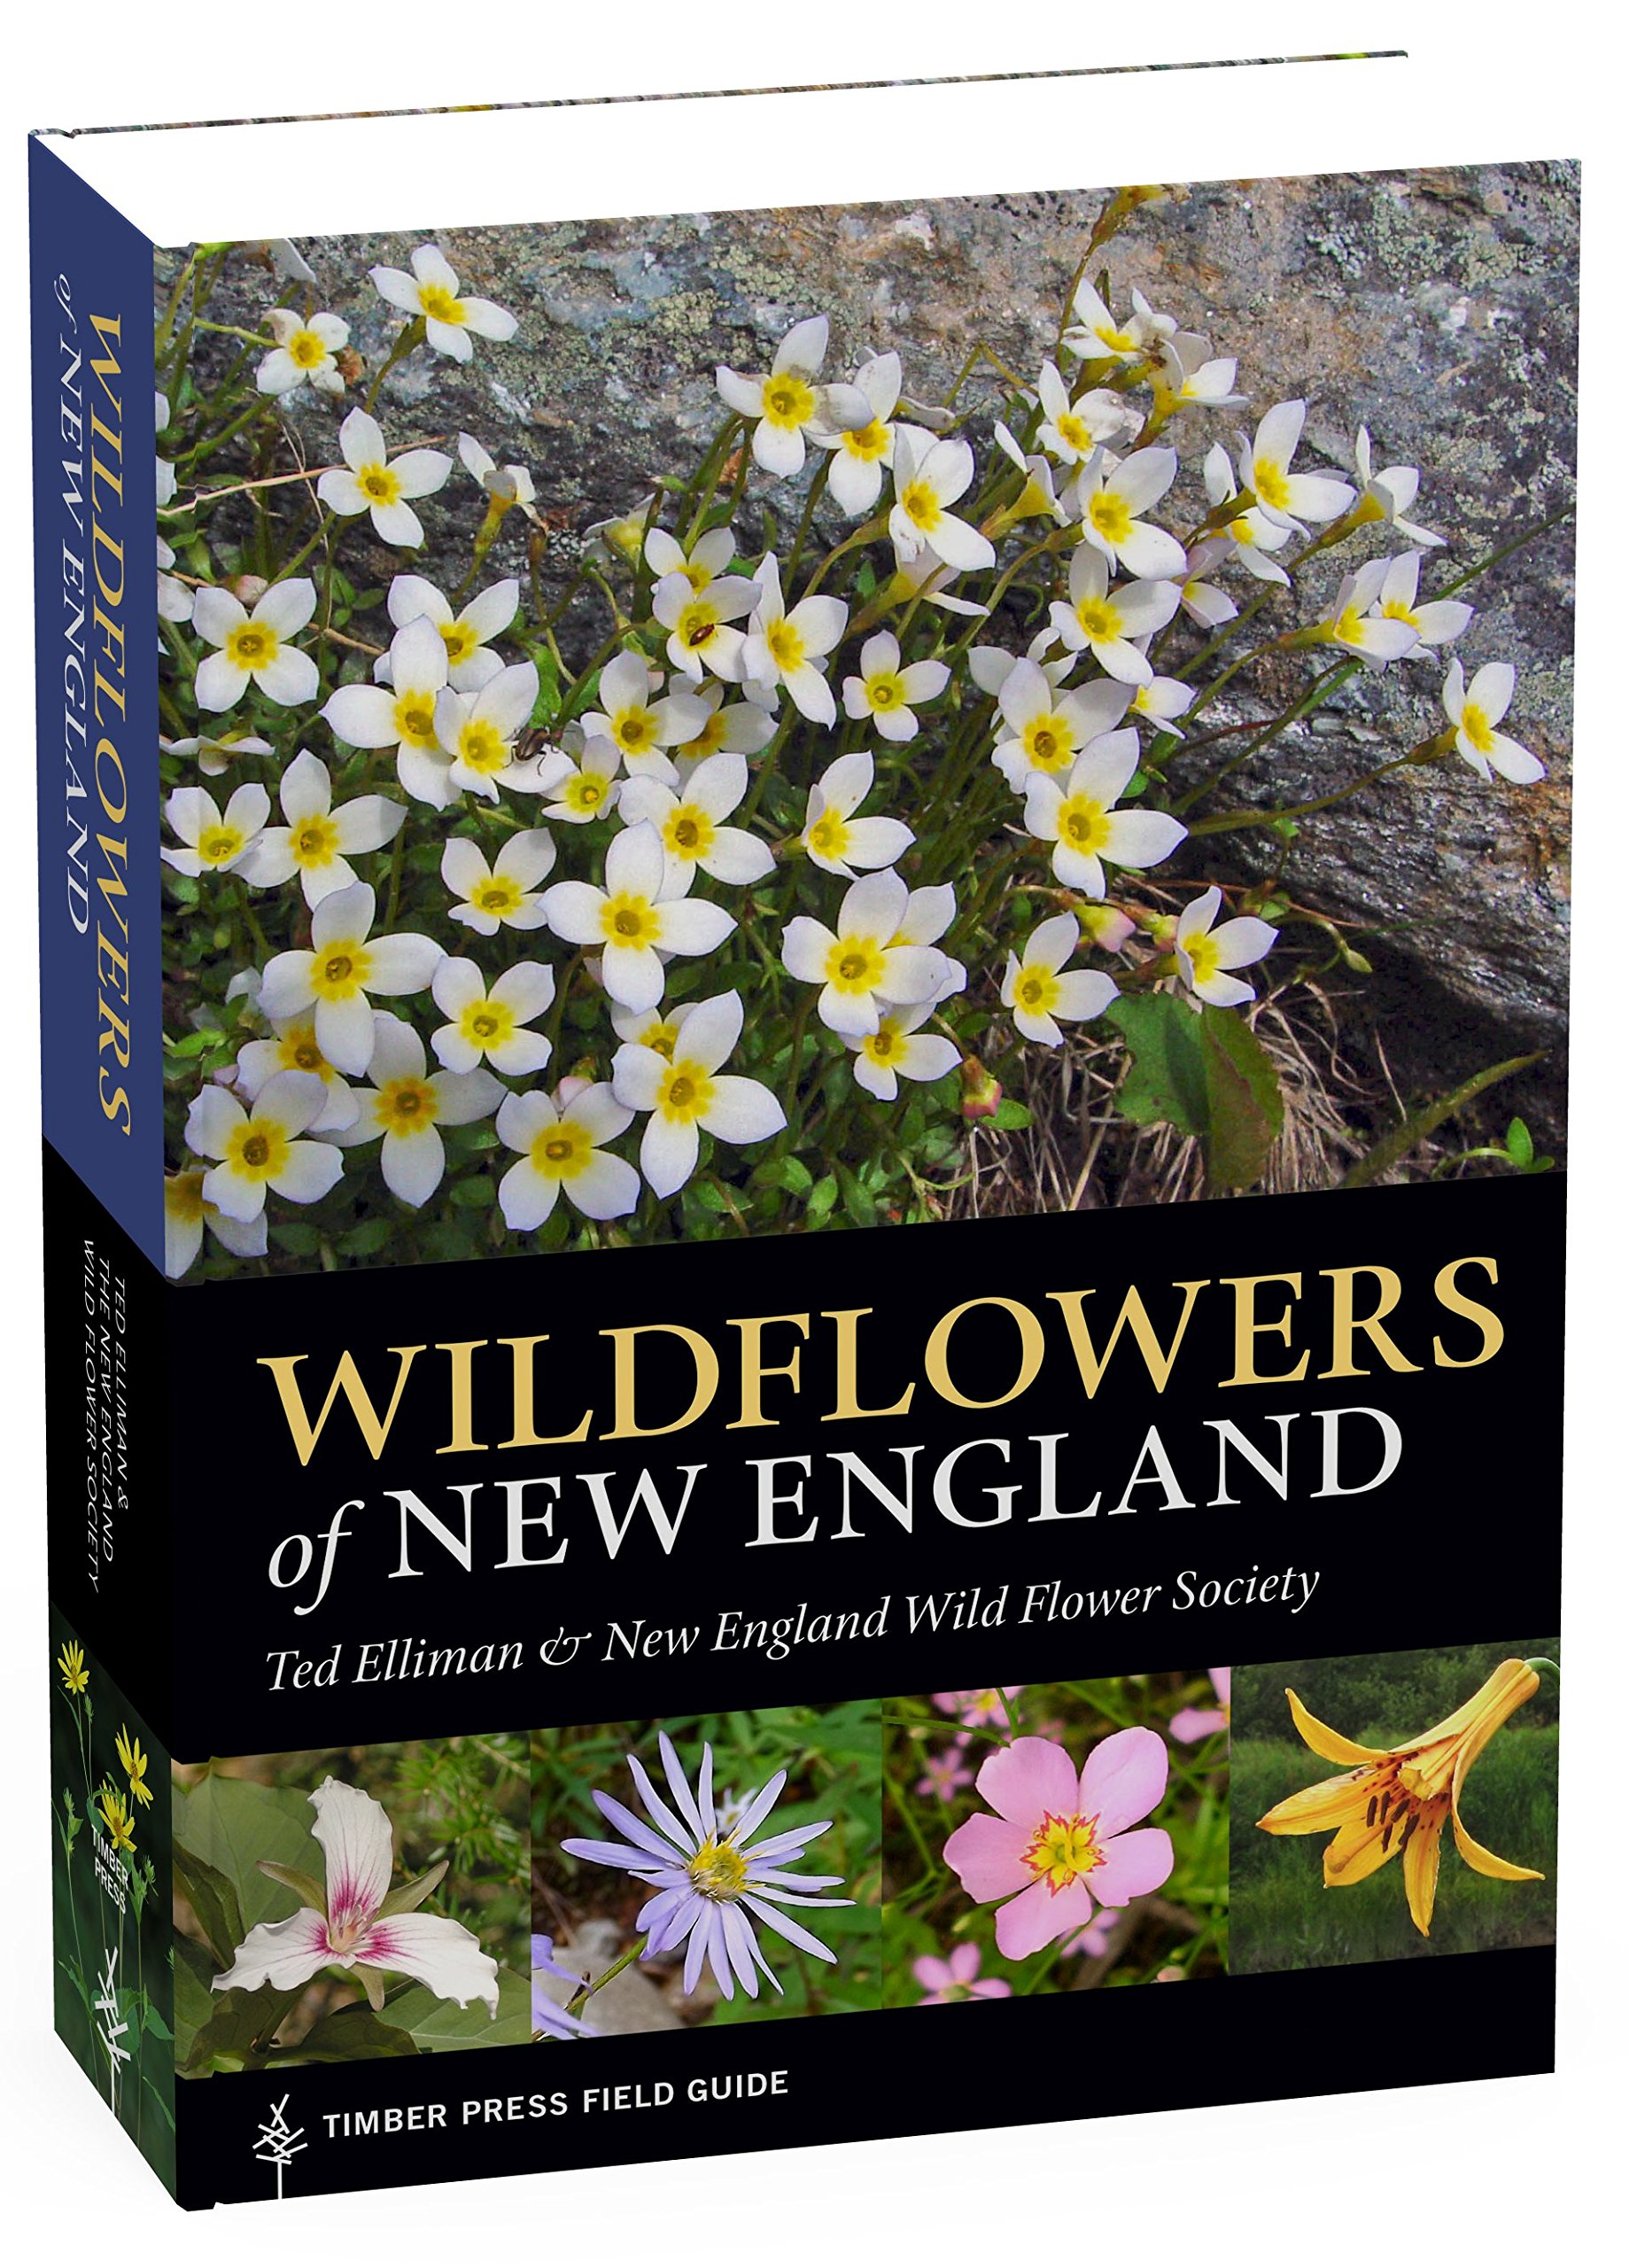 Wildflowers of New England (A Timber Press Field Guide): Ted Elliman ...